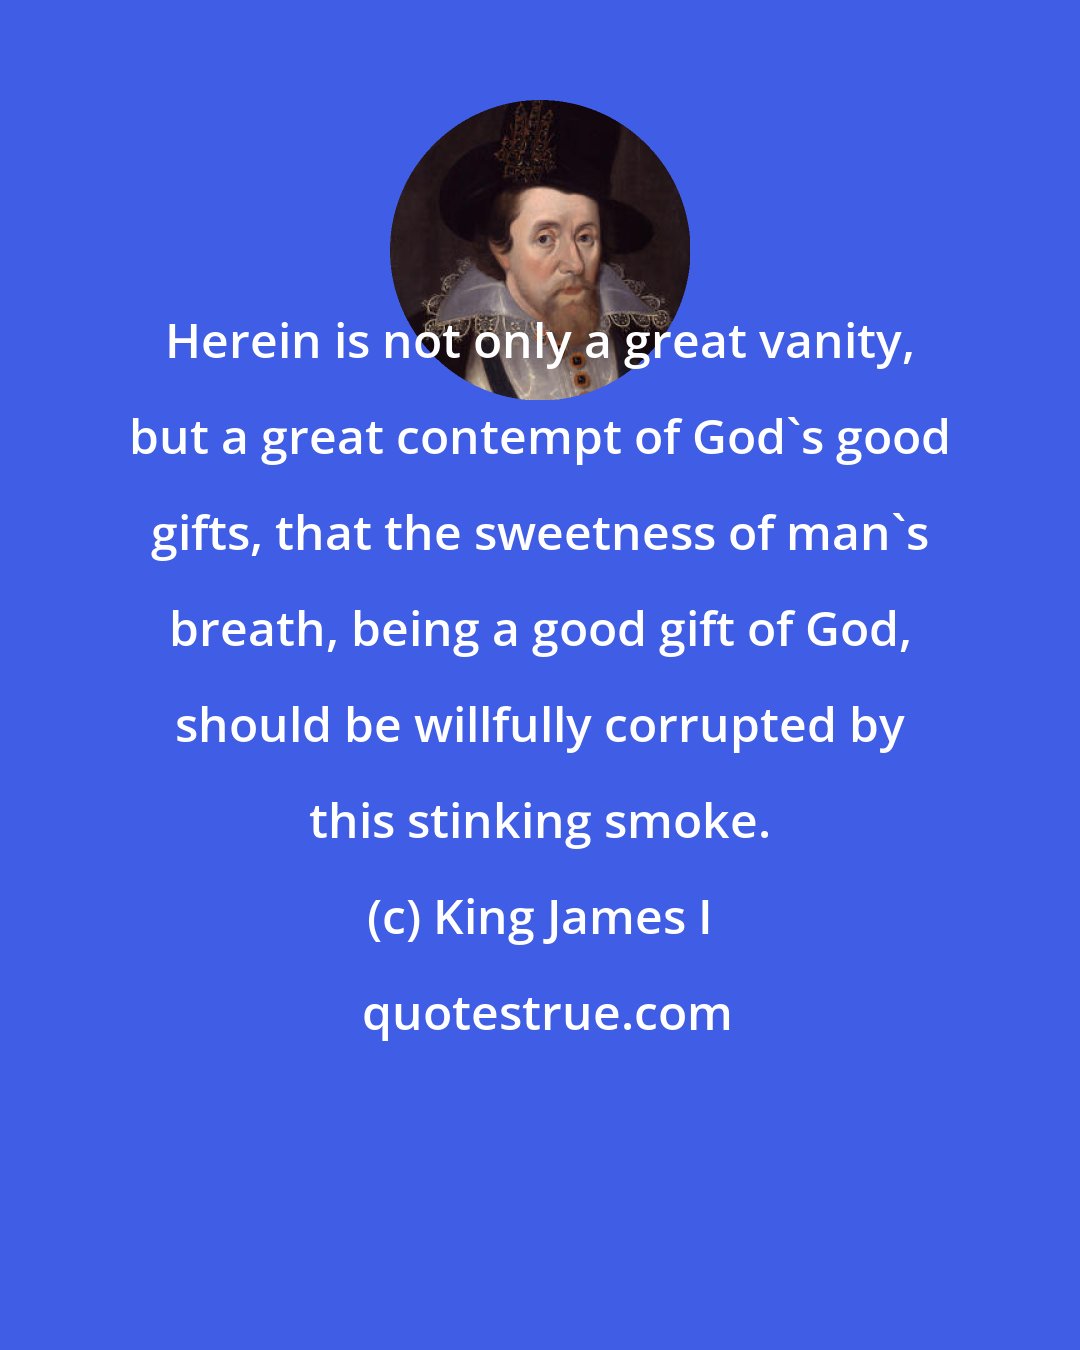 King James I: Herein is not only a great vanity, but a great contempt of God's good gifts, that the sweetness of man's breath, being a good gift of God, should be willfully corrupted by this stinking smoke.